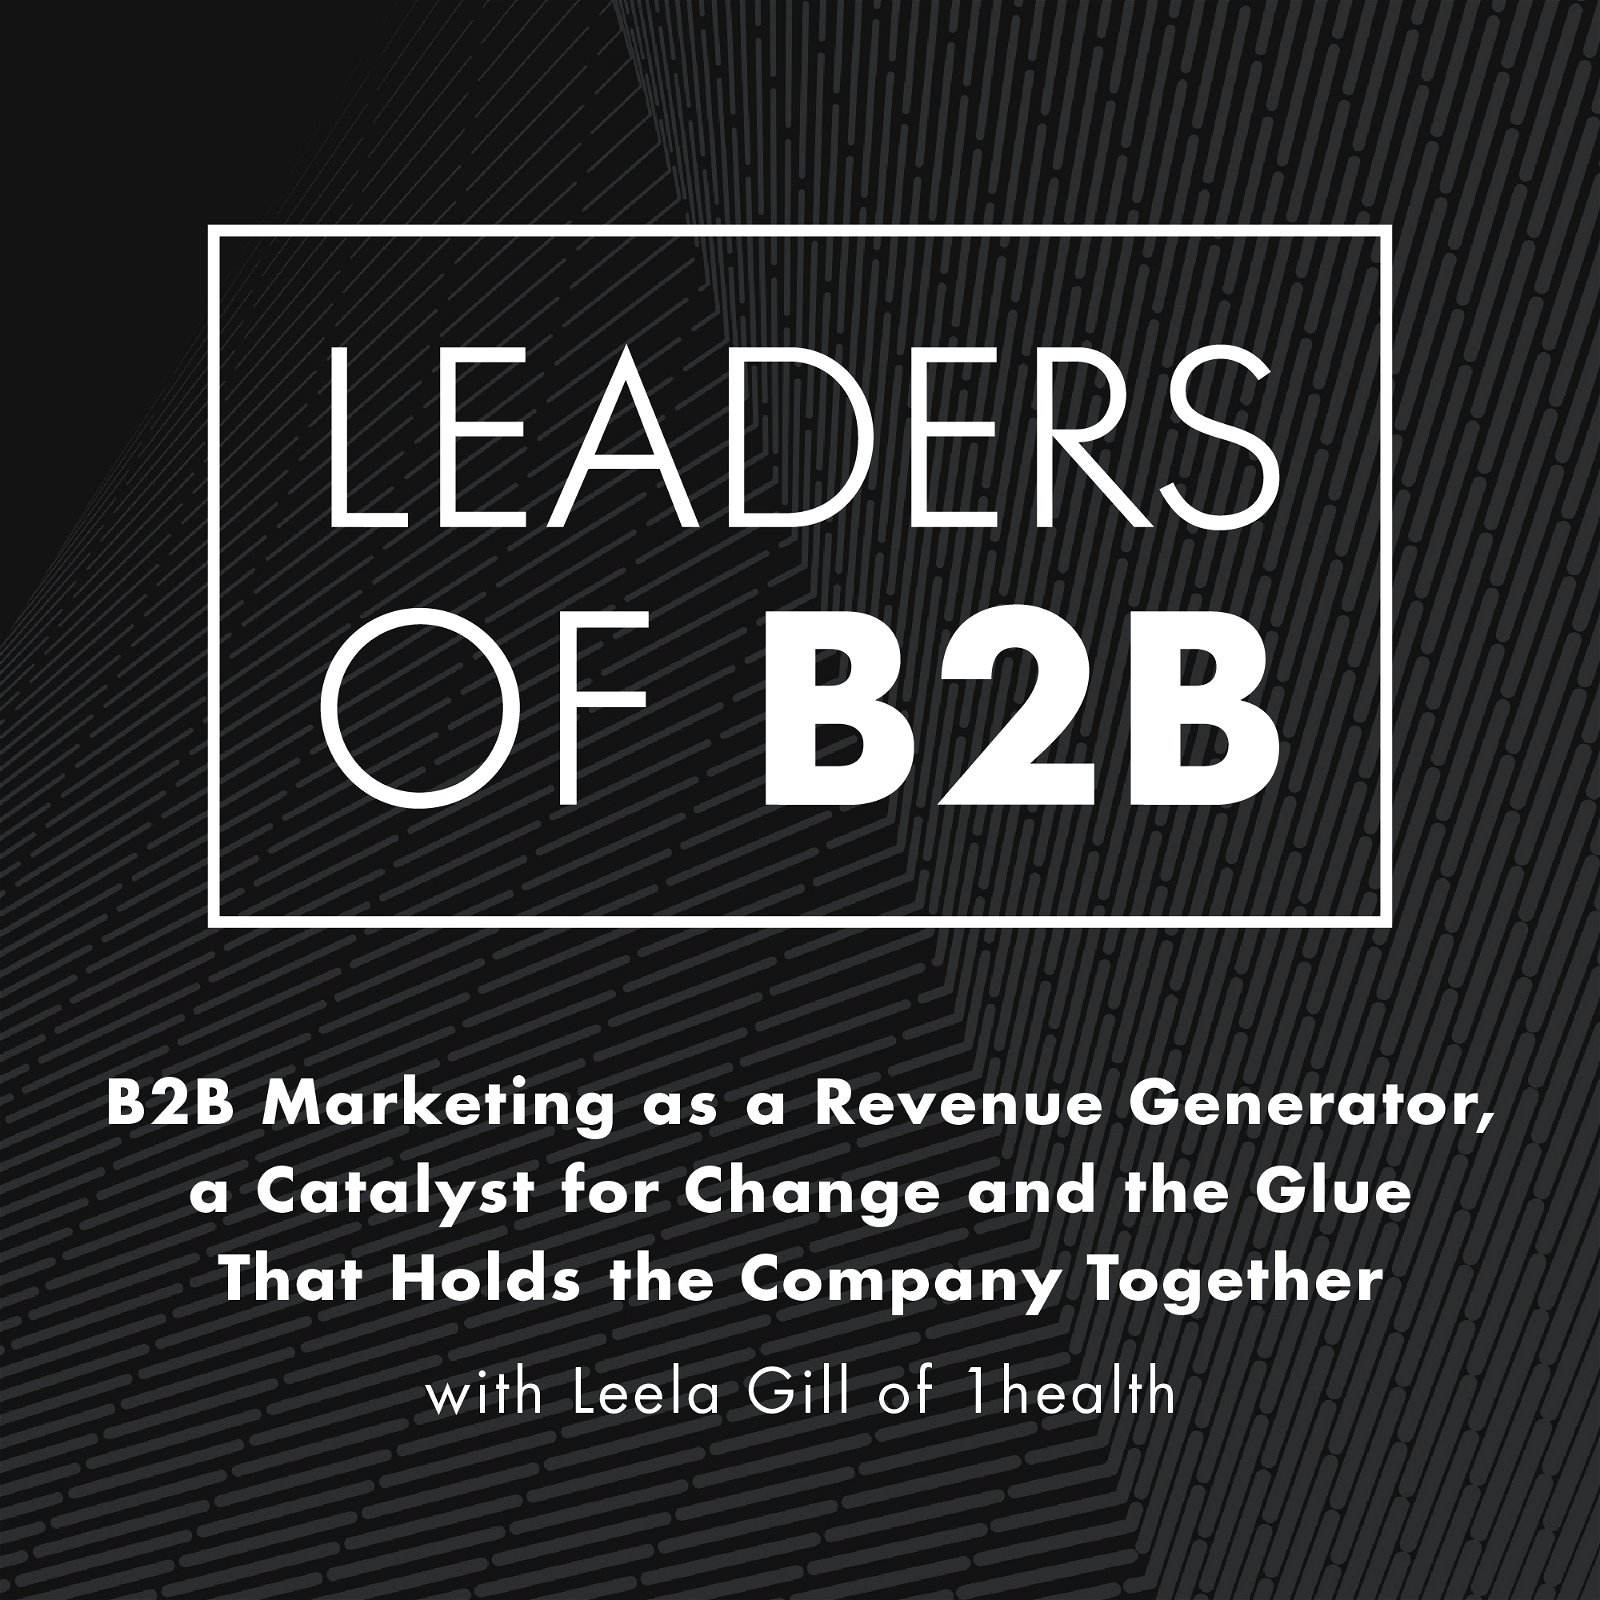 B2B Marketing as a Revenue Generator, a Catalyst for Change and the Glue That Holds the Company Together with Leela Gill of 1health